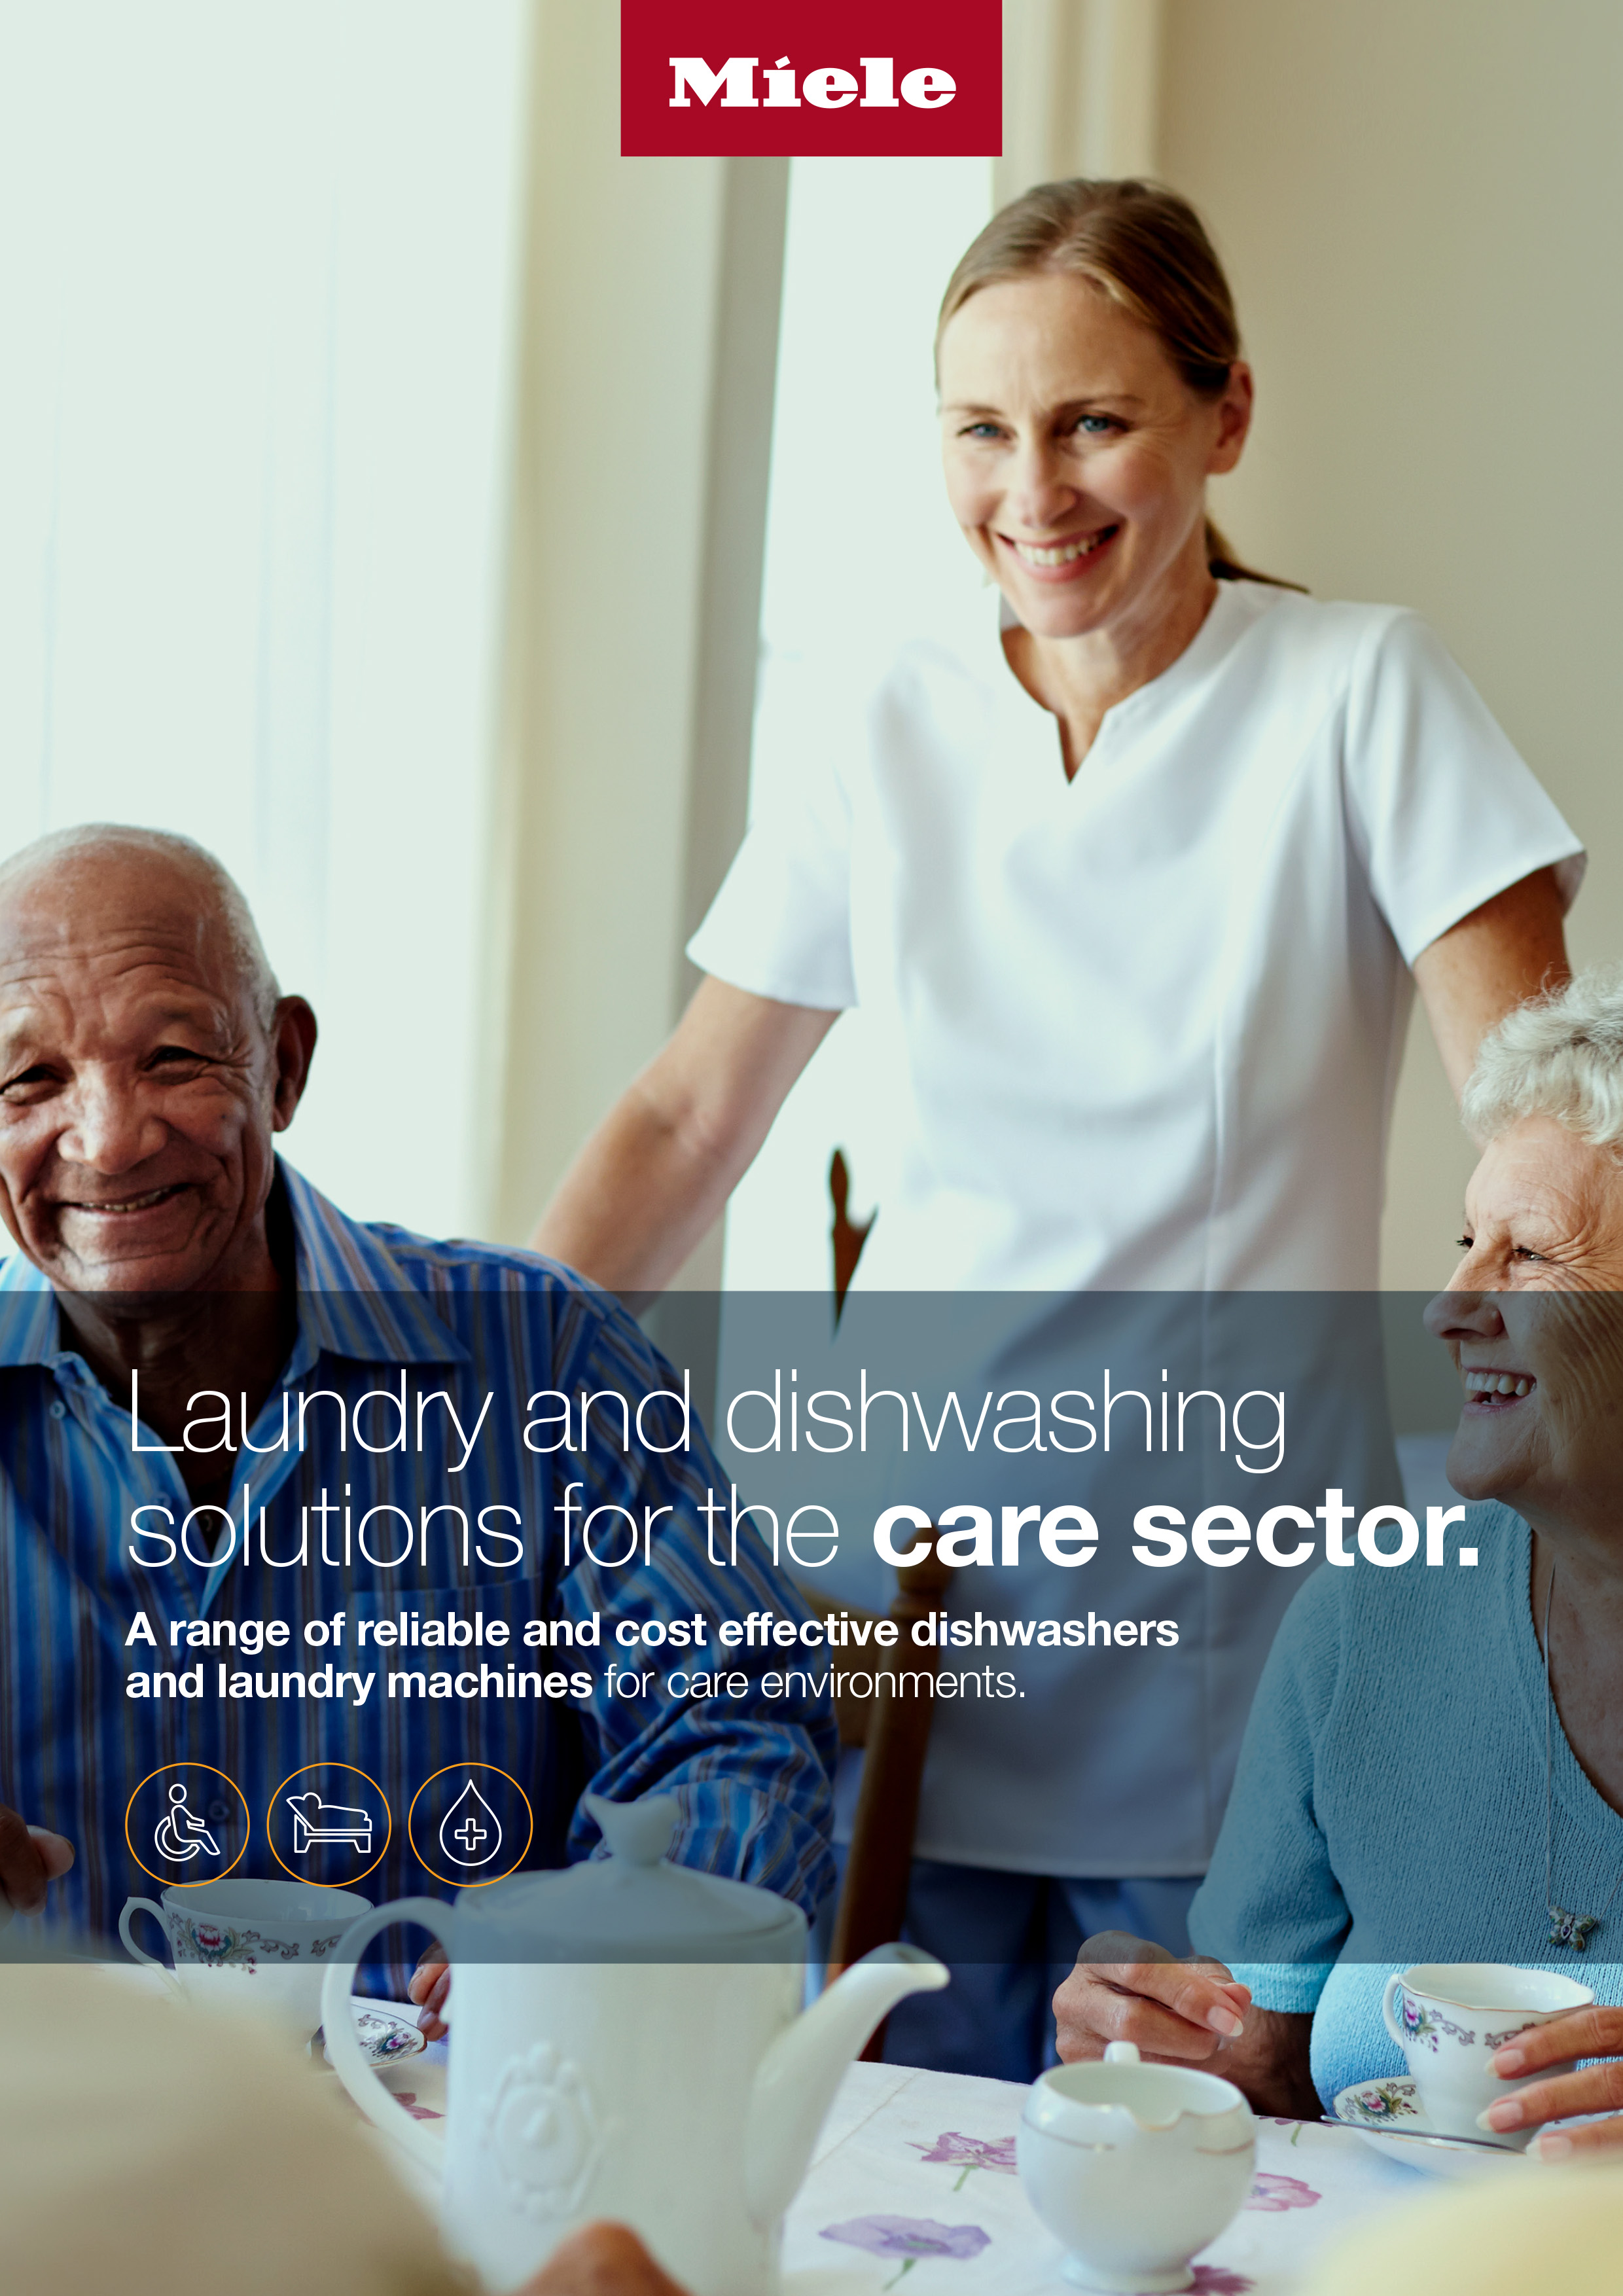 Laundry and dishwashing solutions for the care sector brochure